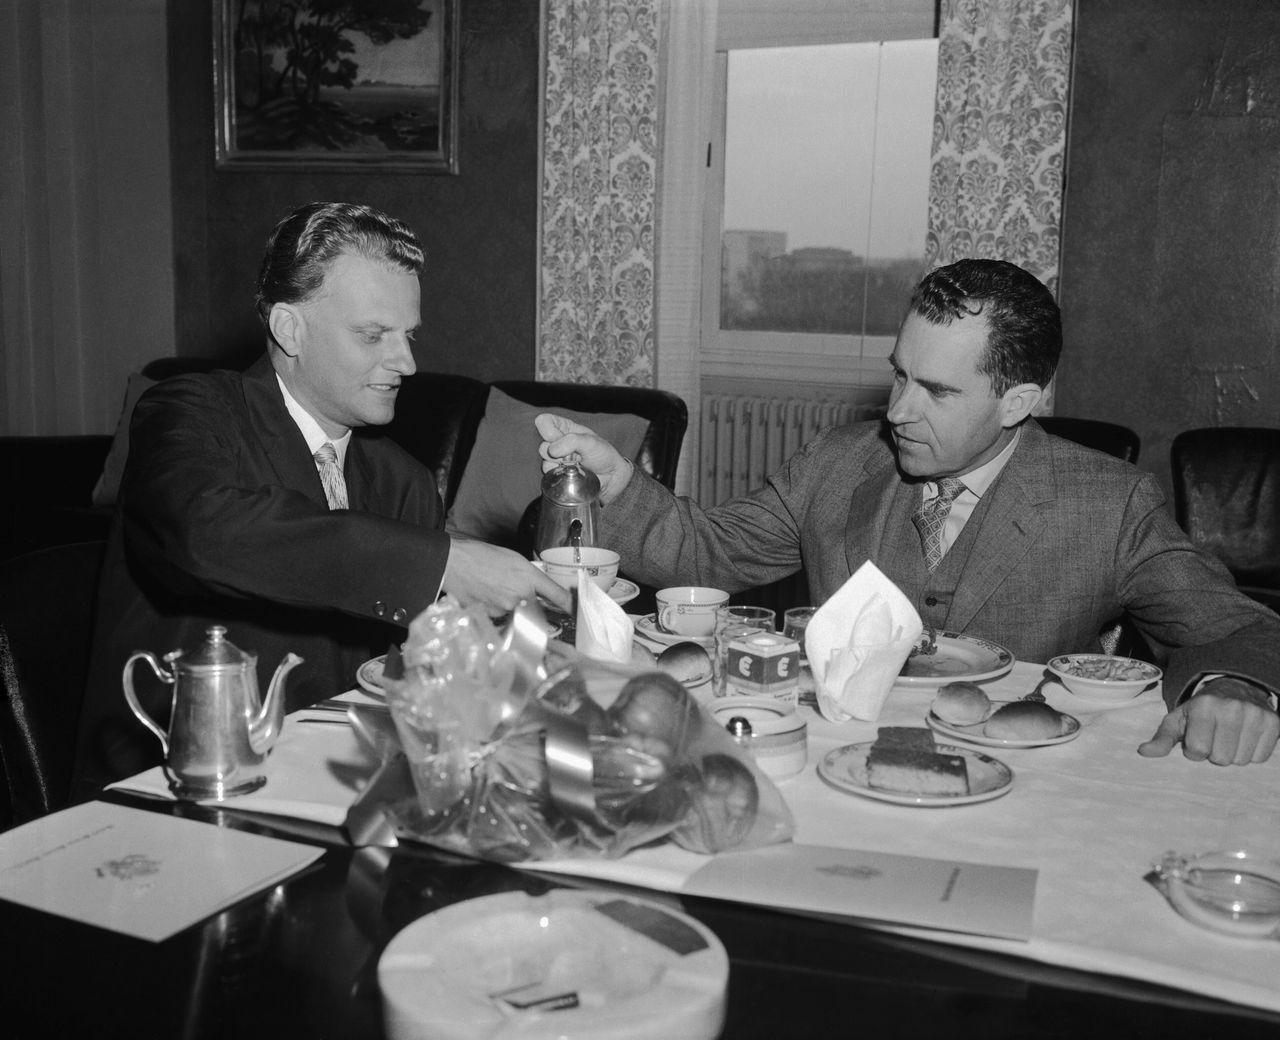 Richard Nixon, vice president at the time of this photo, pours coffee for the Reverend Billy Graham during a private luncheon in his office. Later, when Nixon became president, recordings in the Oval Office captured Graham, an ardent Christian Zionist, making antisemitic remarks.